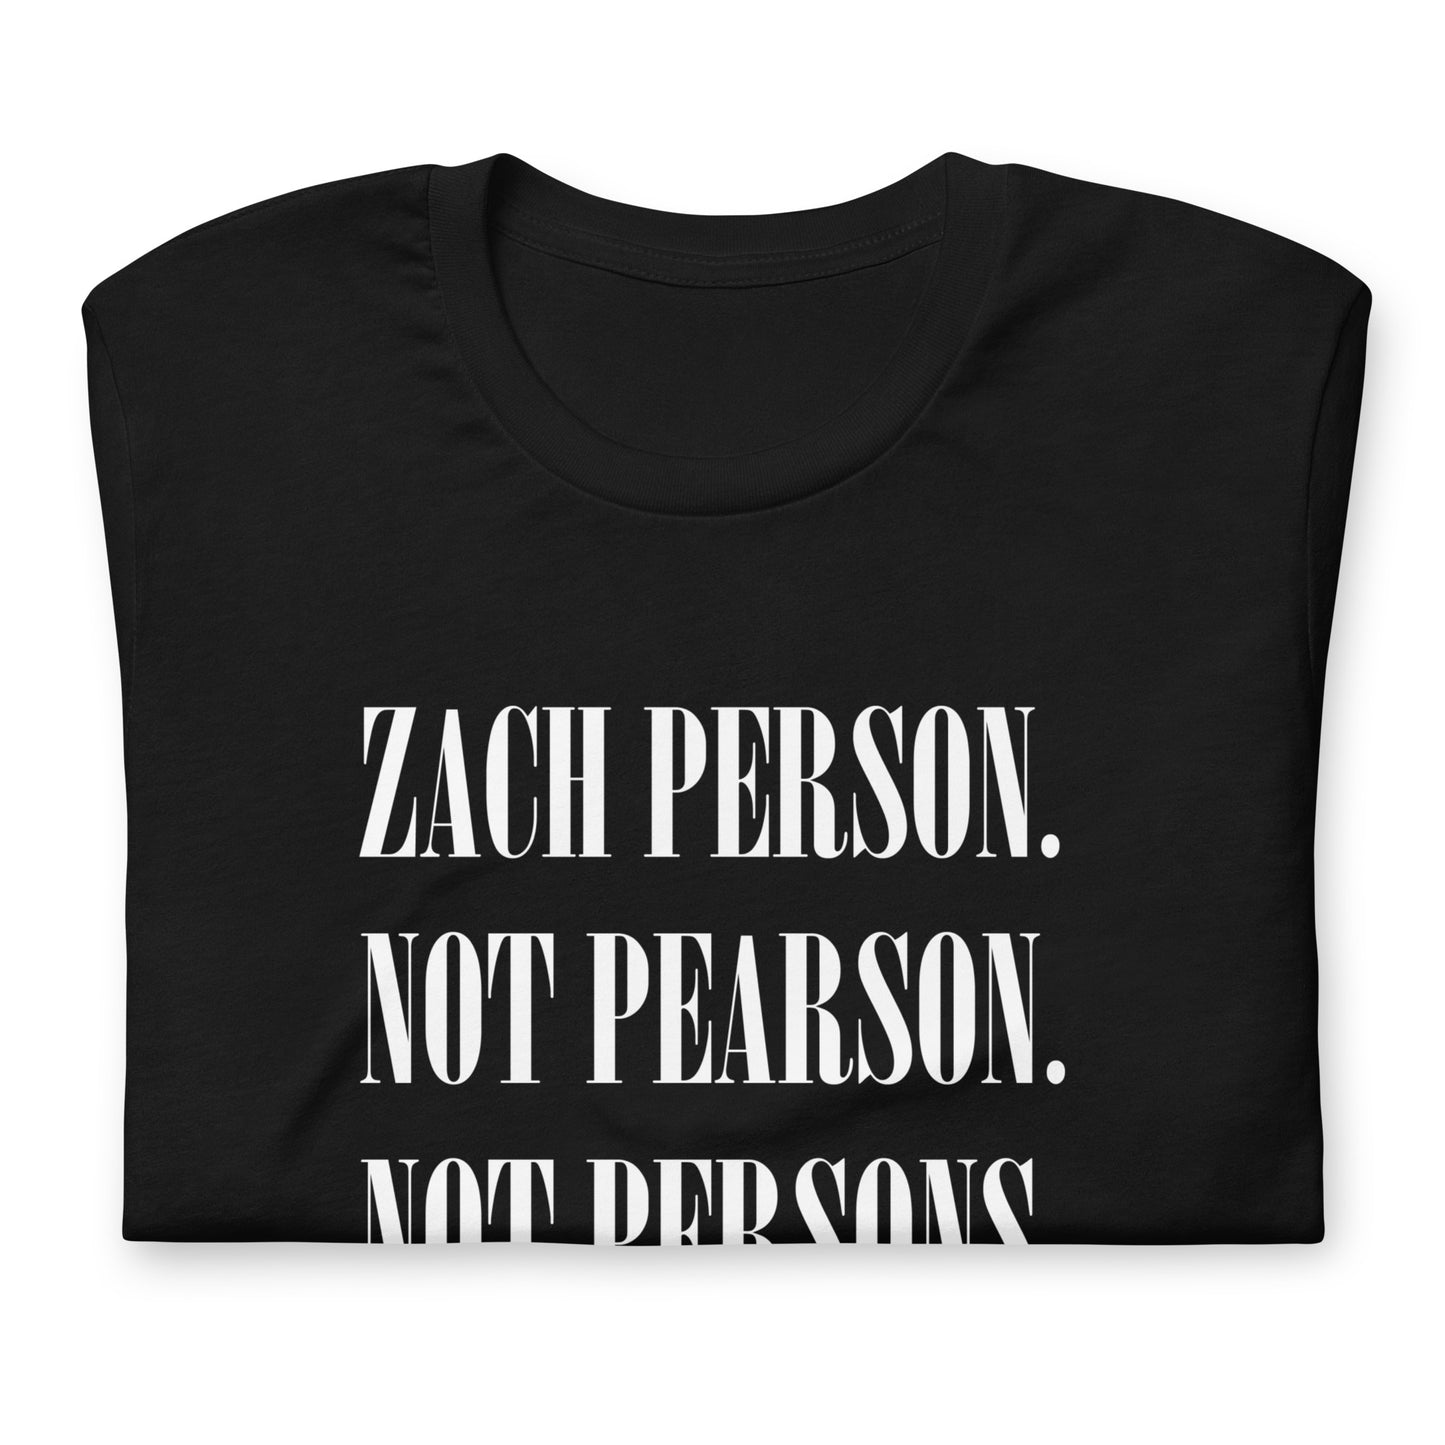 "PERSON" T-Shirt